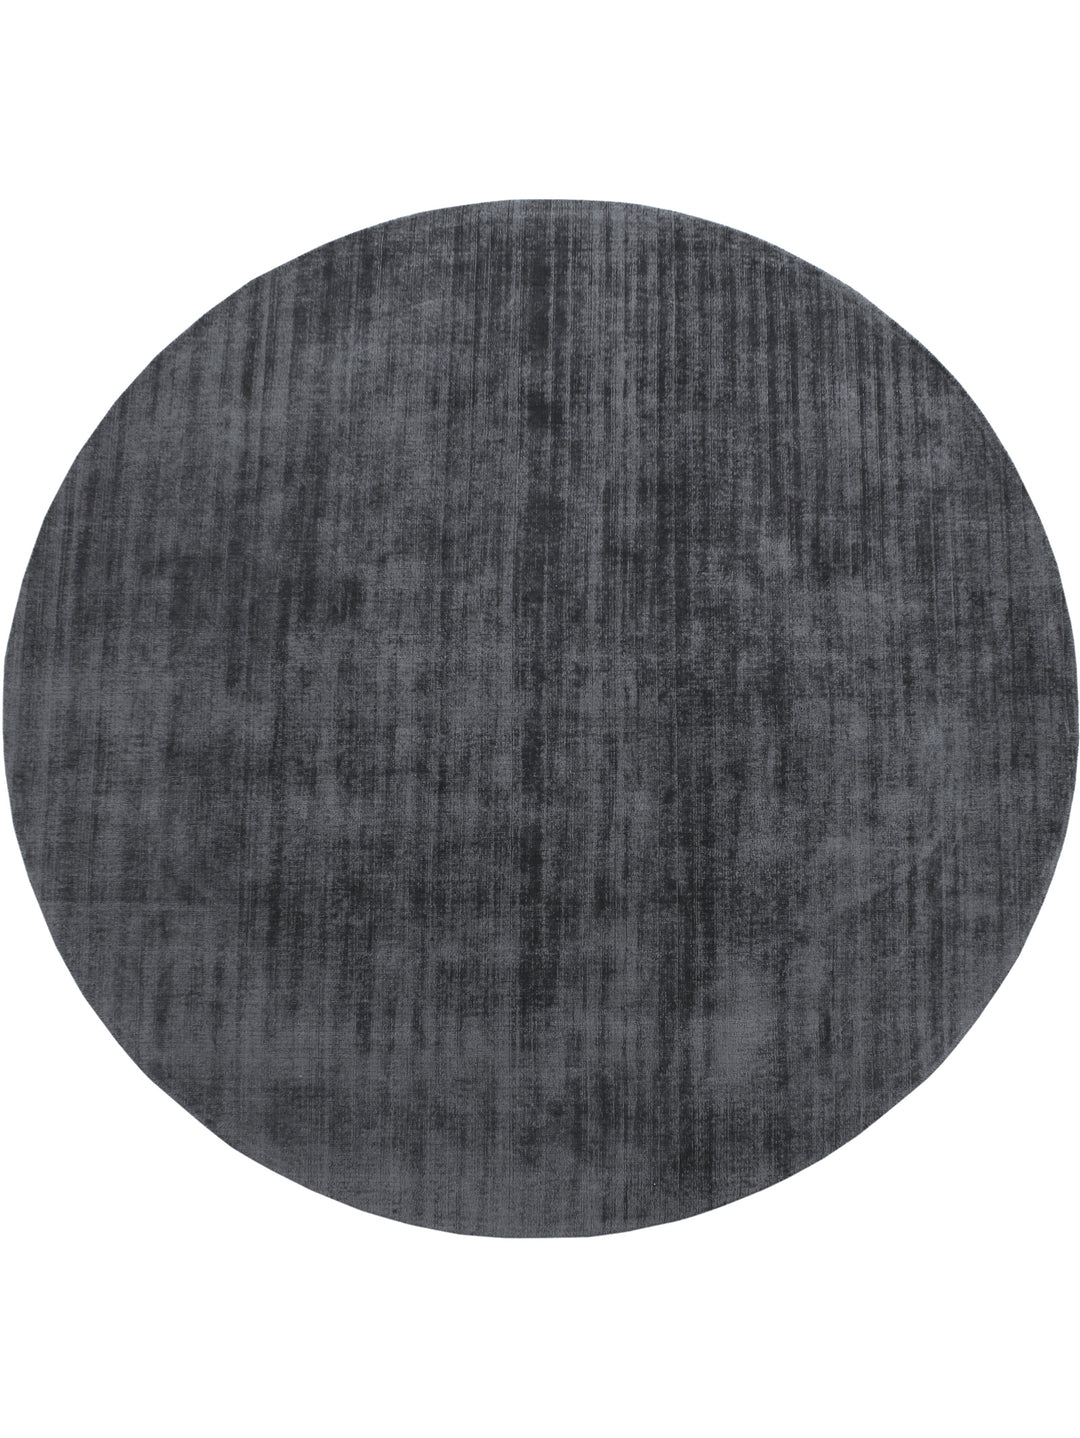 Glorious Round Rug in Carbon